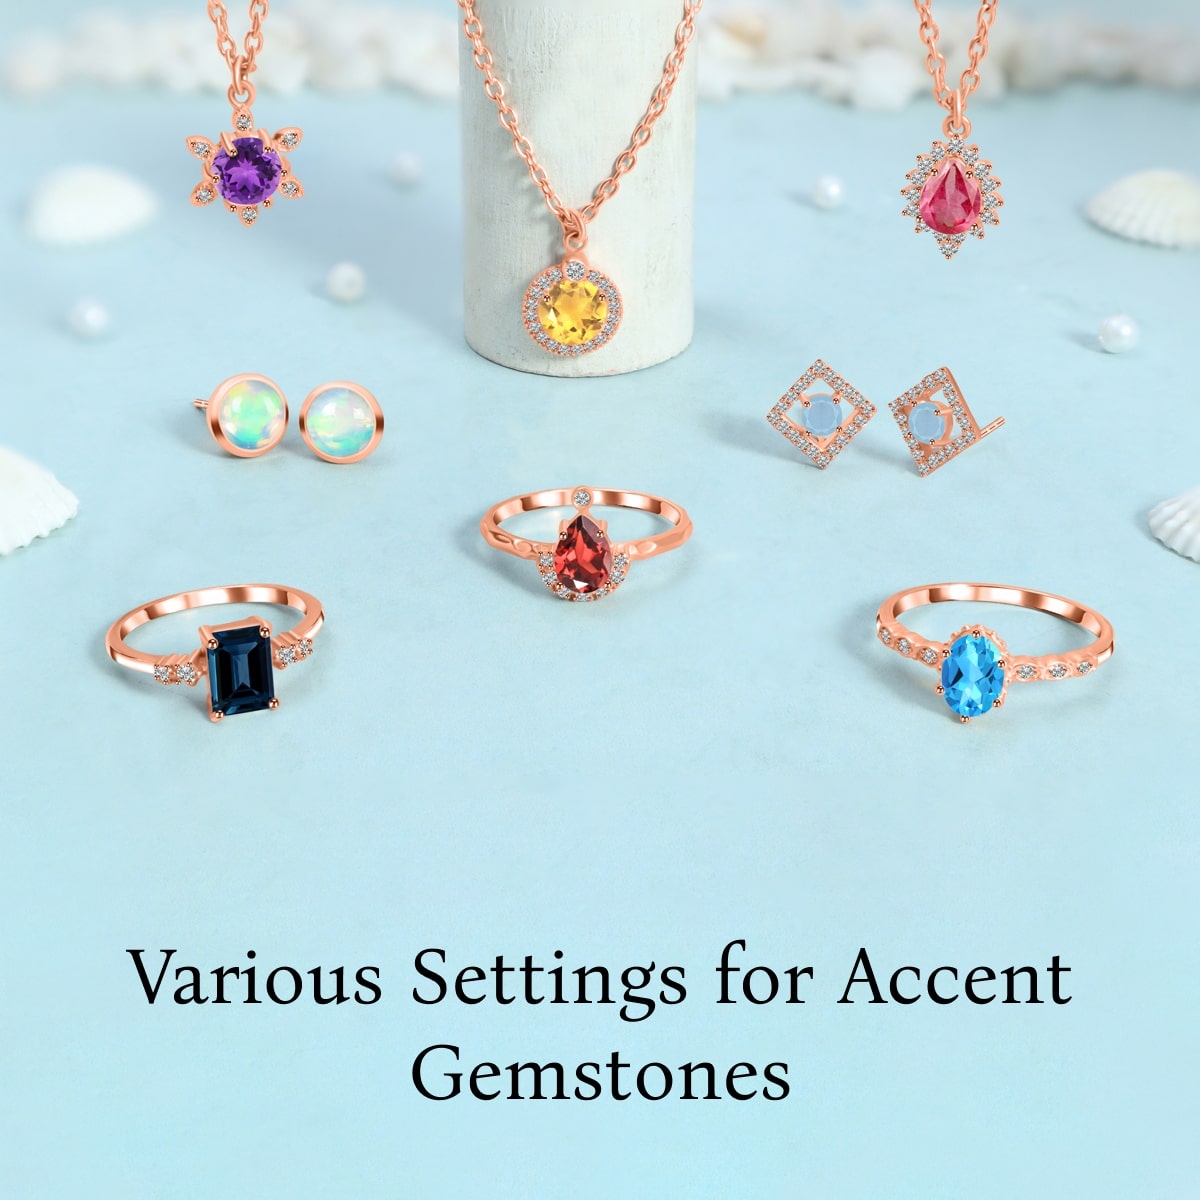 The Different Settings Used for Accent Gemstones